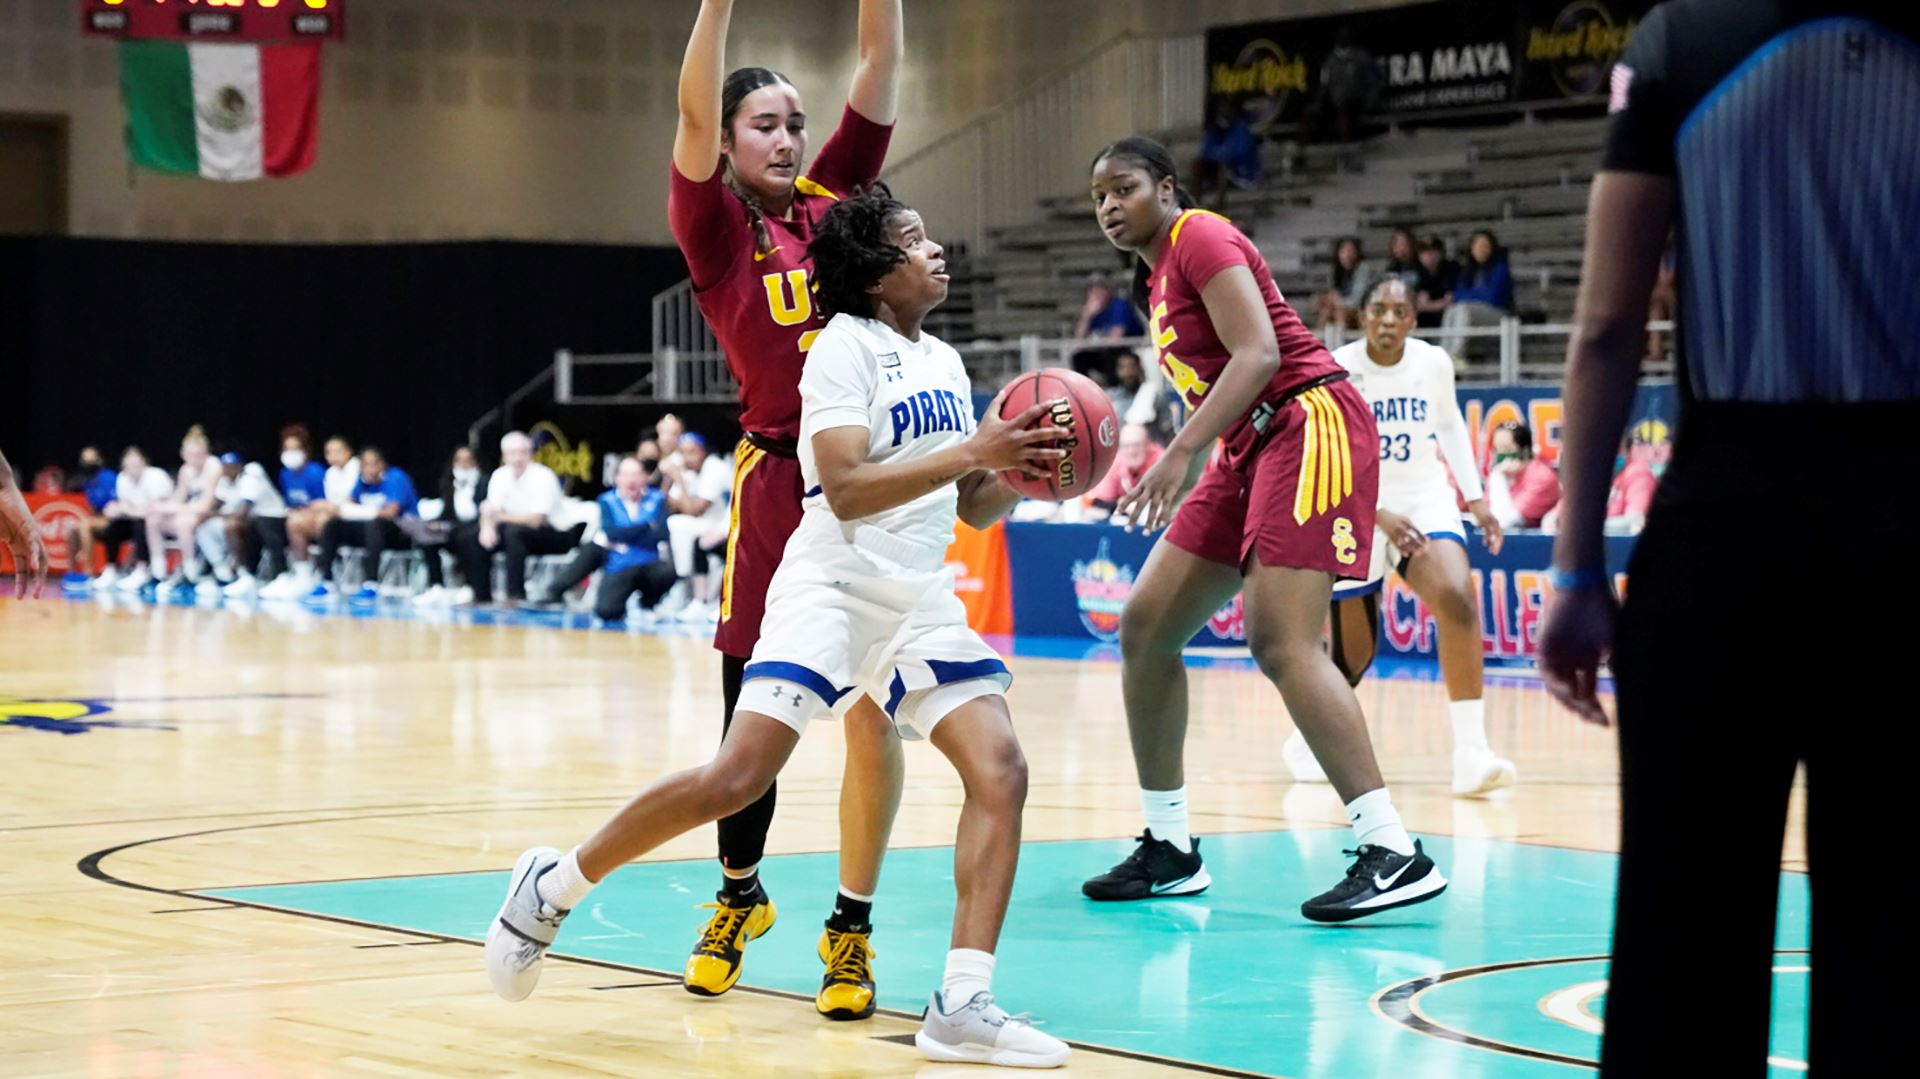 Seton Hall's Lauren Park-Lane drives in the paint during a game against USC in the 2021 Cancun Challenge.